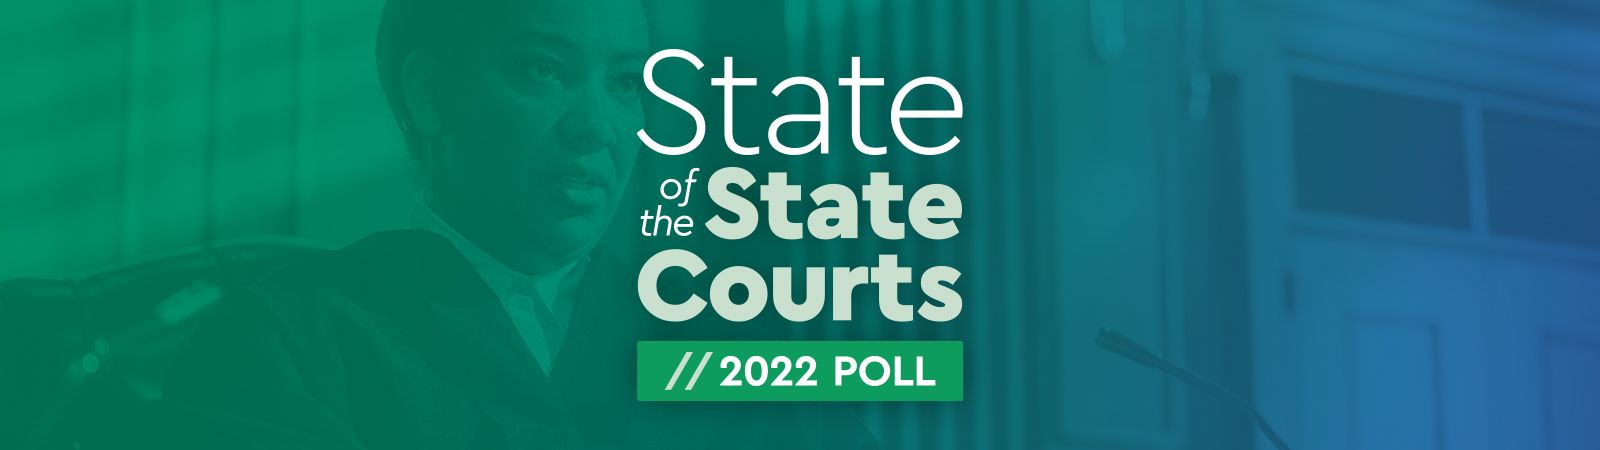 State of the State Courts 2022 banner image banner image